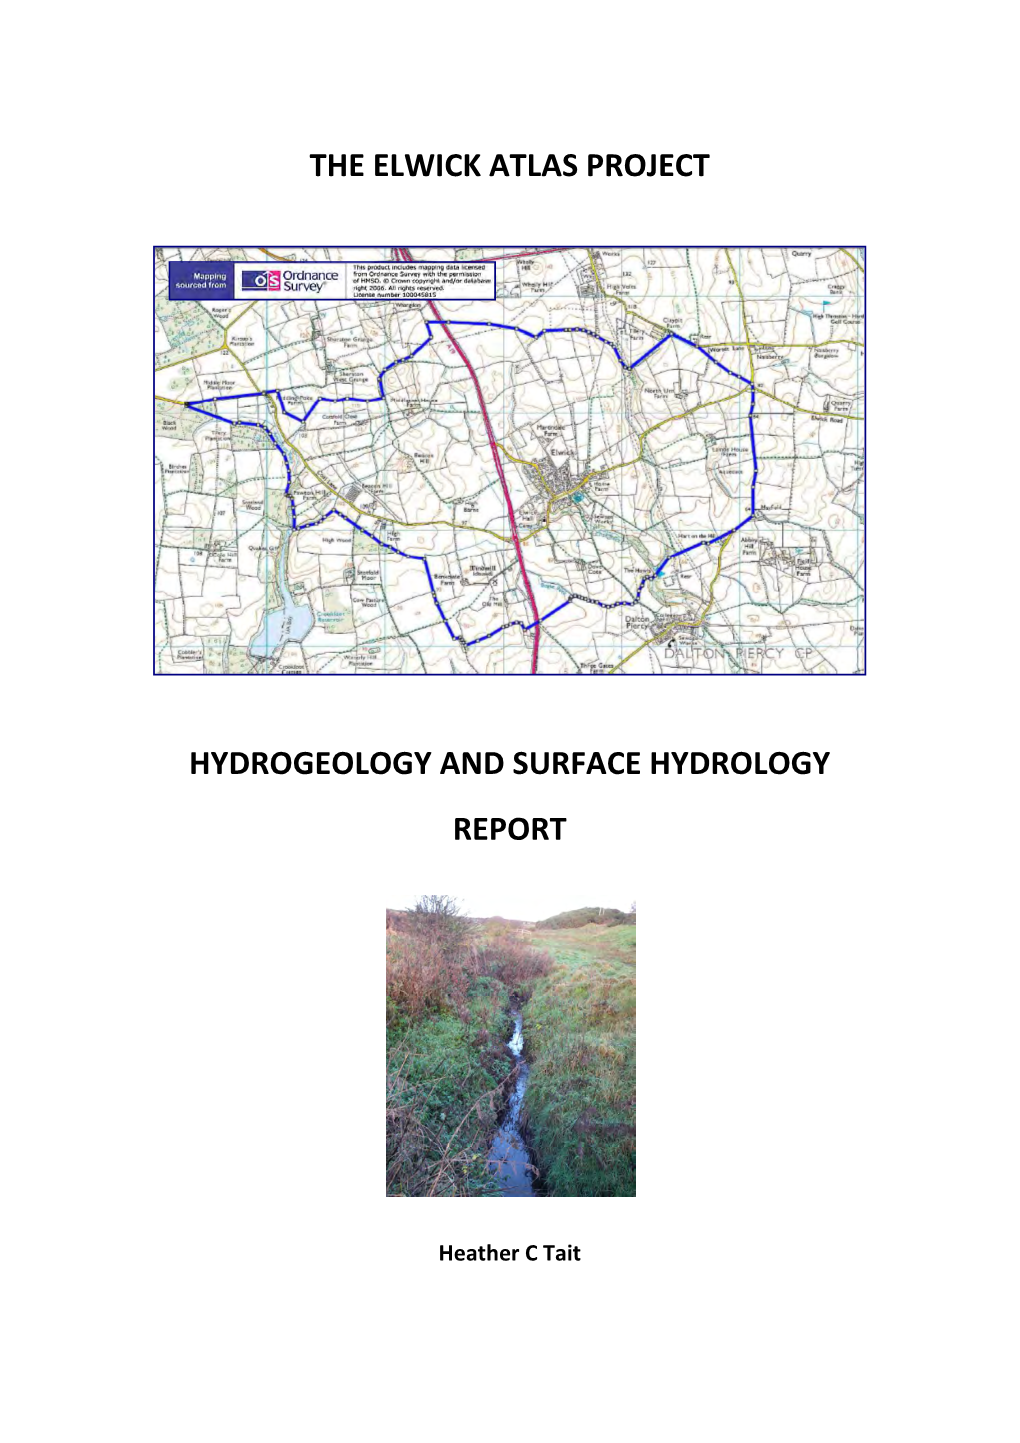 Hydrogeology and Surface Hydrology Report